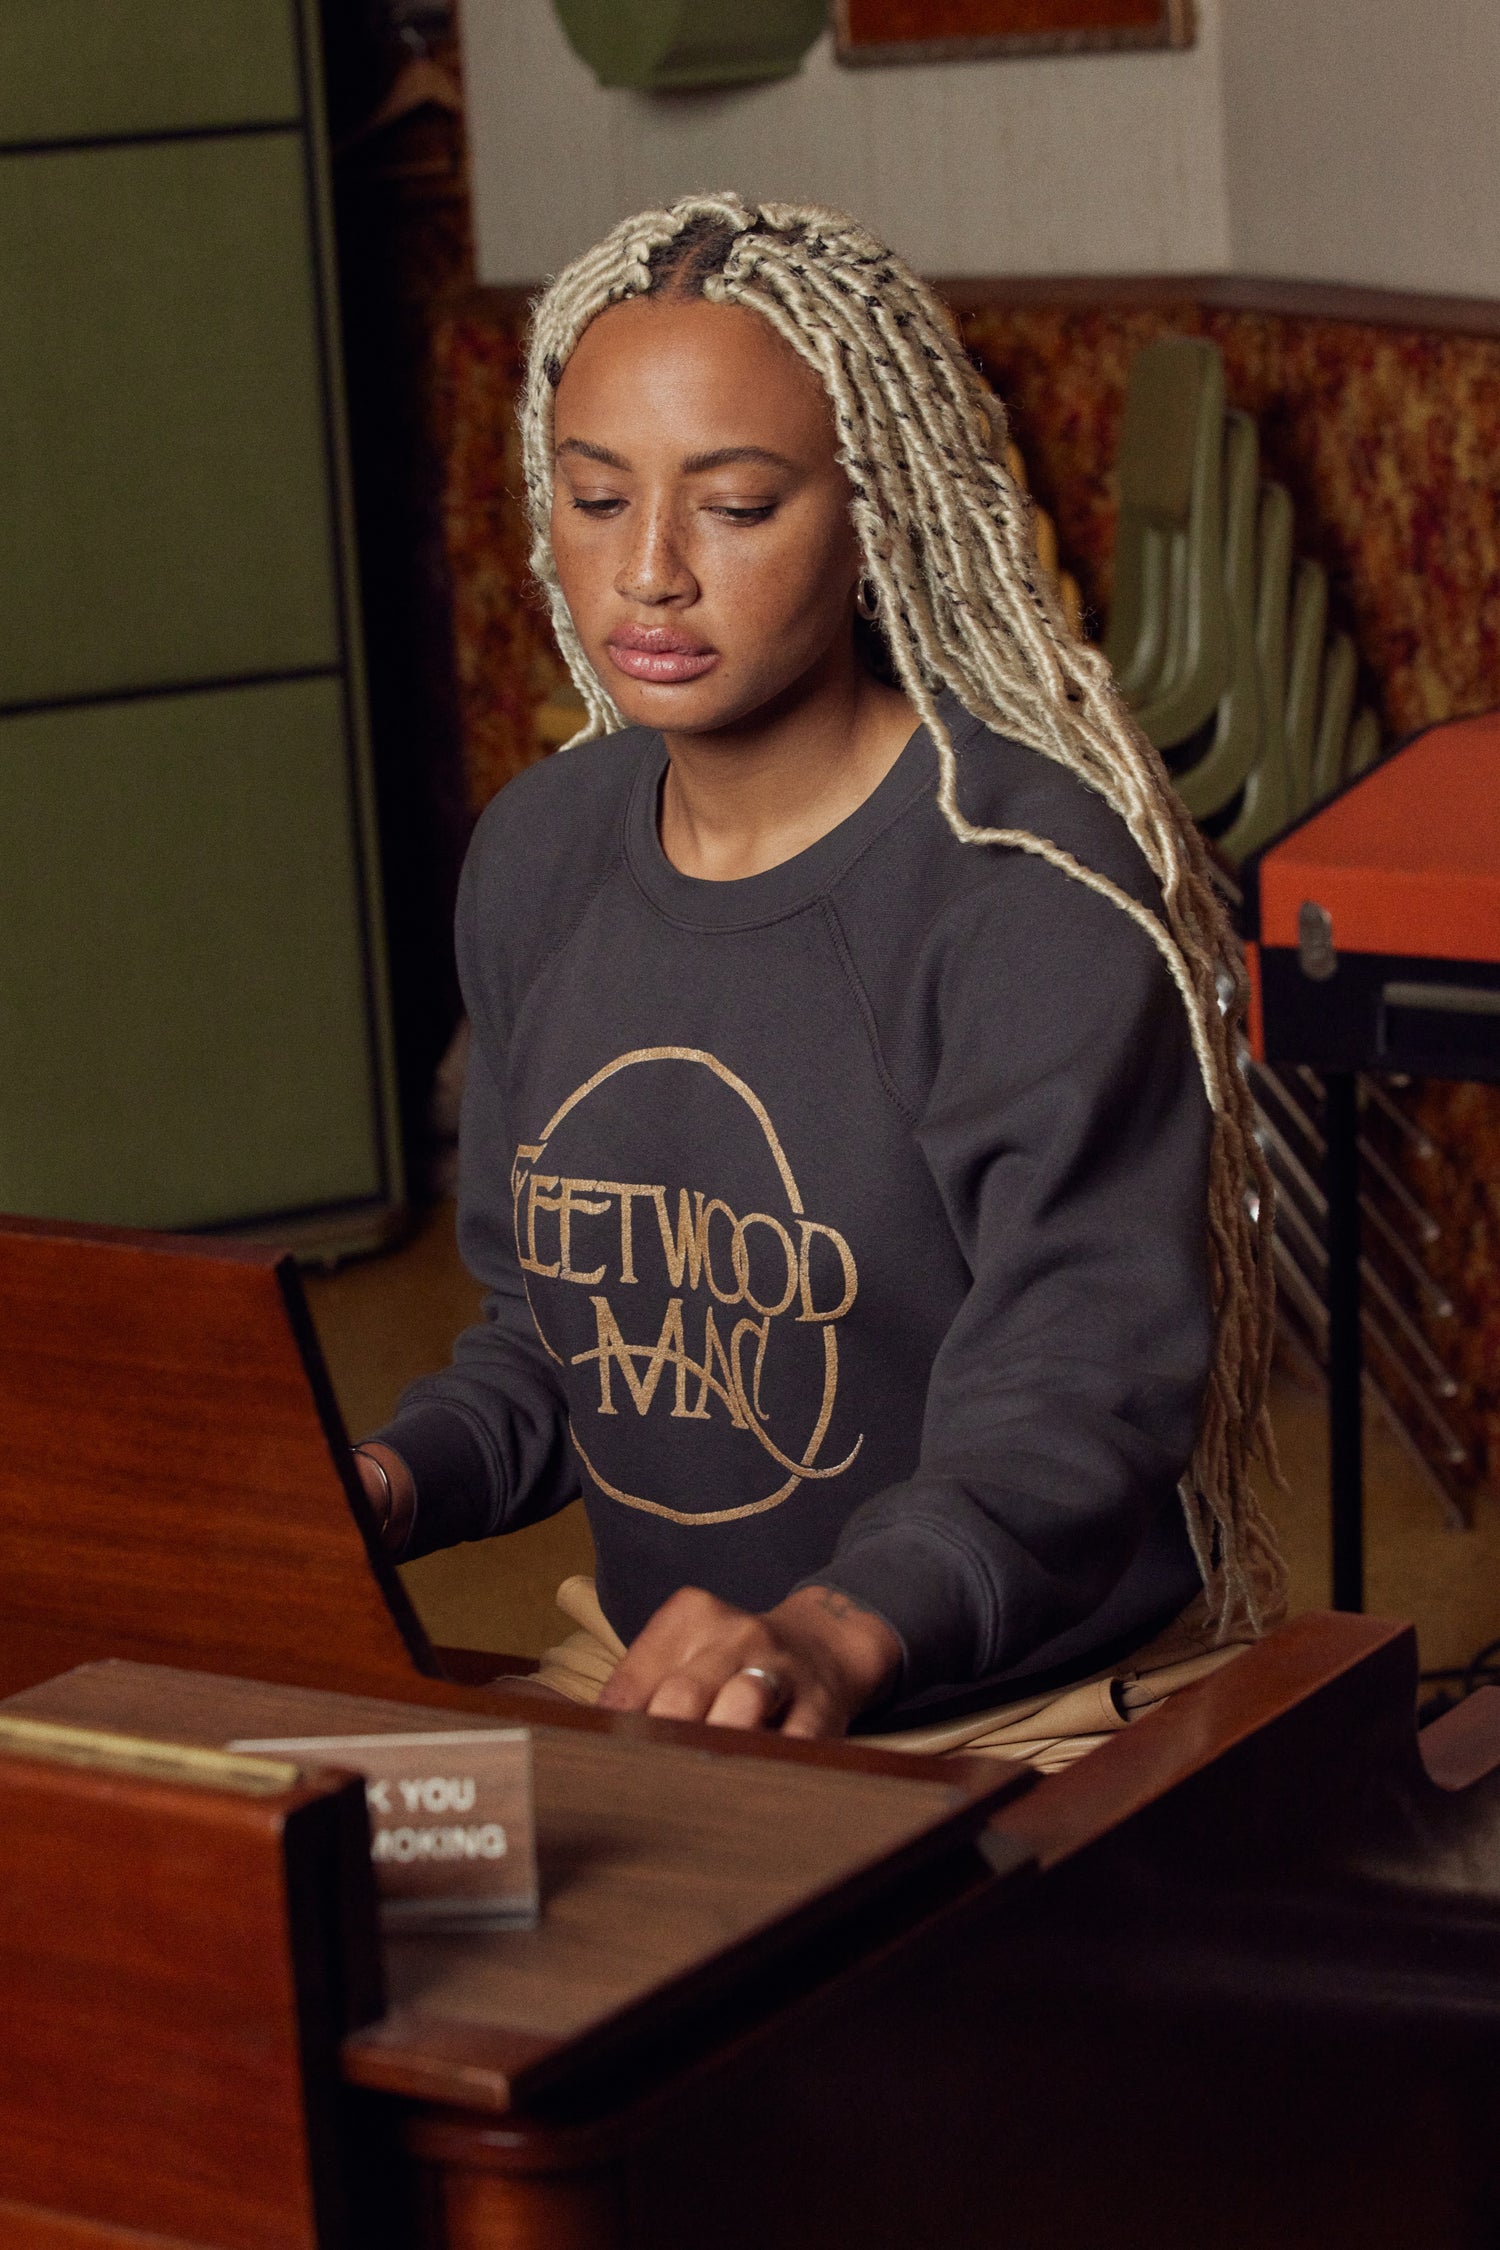 A model featuring a washed black raglan crew stamped with Fleetwood Mac in a circle.